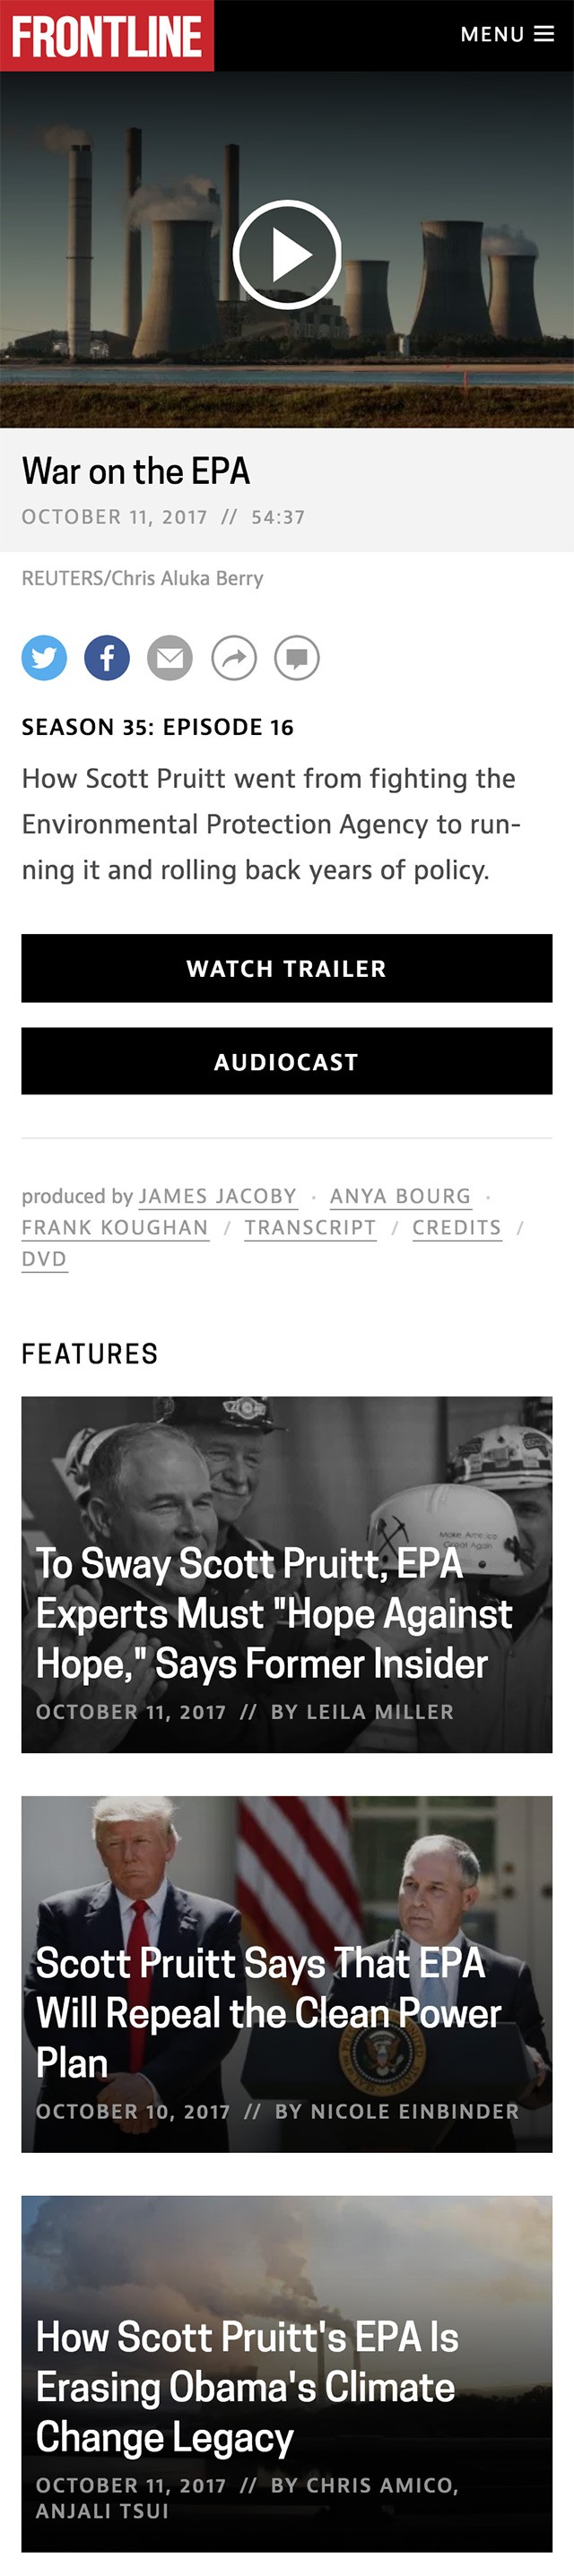 The mobile layout for the film page.